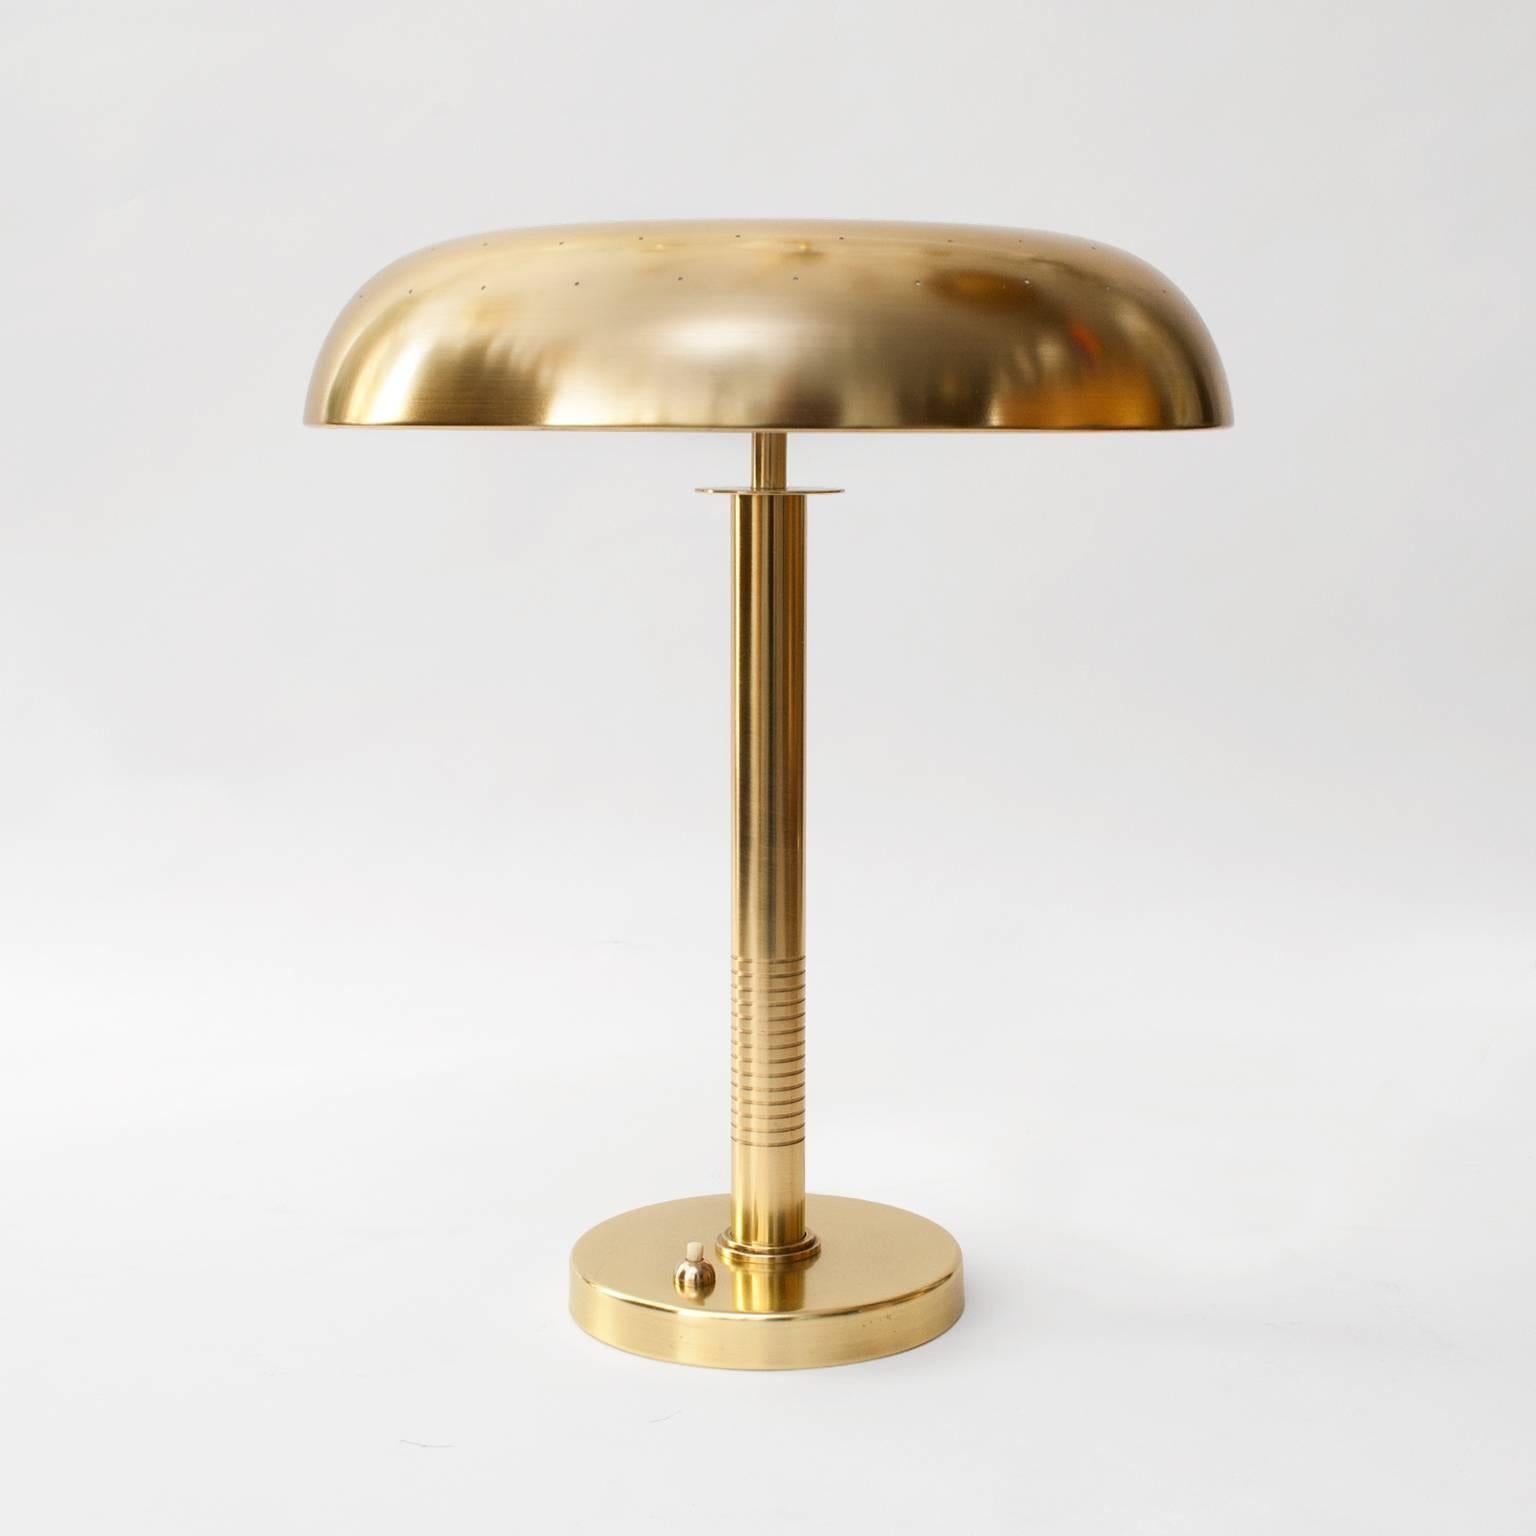 Scandinavian modern table / desk lamp by Bertil Brisborg for Bohlmarks,  Sweden, circa 1950. Newly restored polished an lacquered brass, newly wired with 2 standard base sockets for use in the USA. Impressed manufacturer's mark to underside. Shade